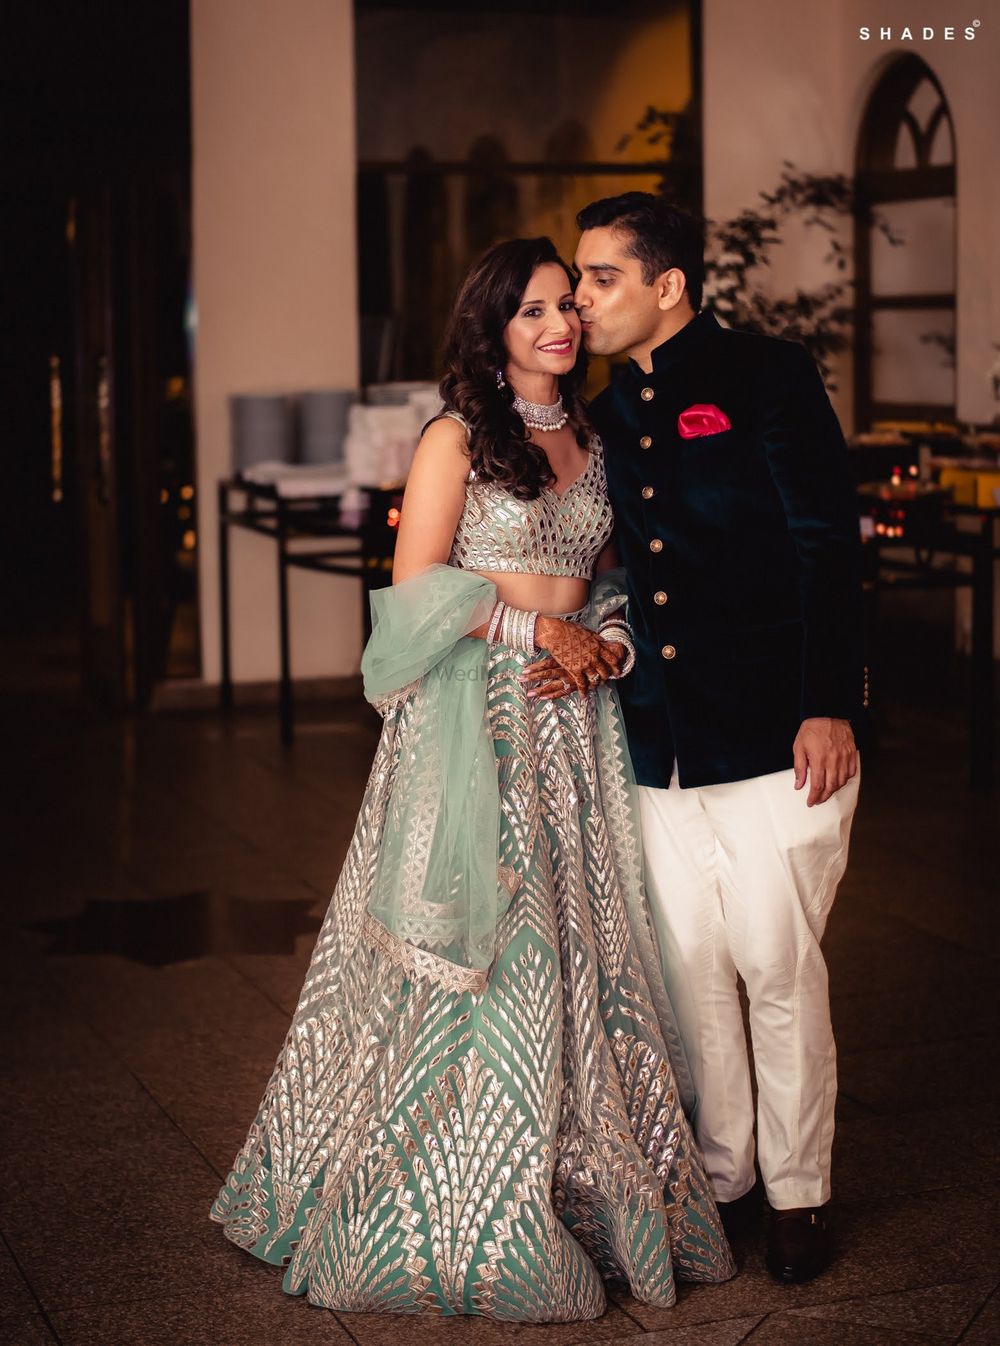 Photo of A bride in a shimmer lehenga posing with her groom-to-be at their sangeet